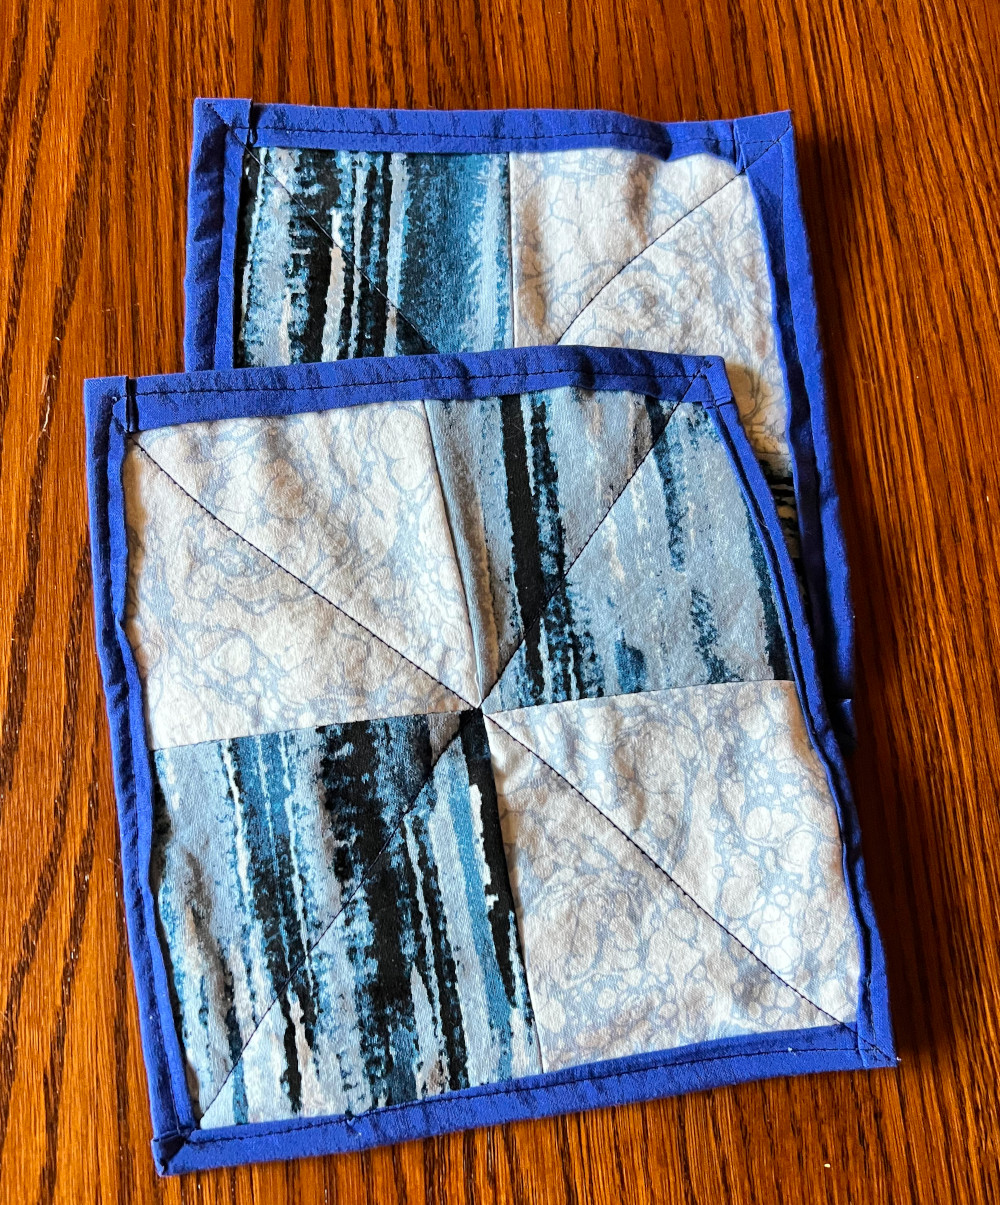 Sew a Mug Rug — Quick and Easy Sewing Project